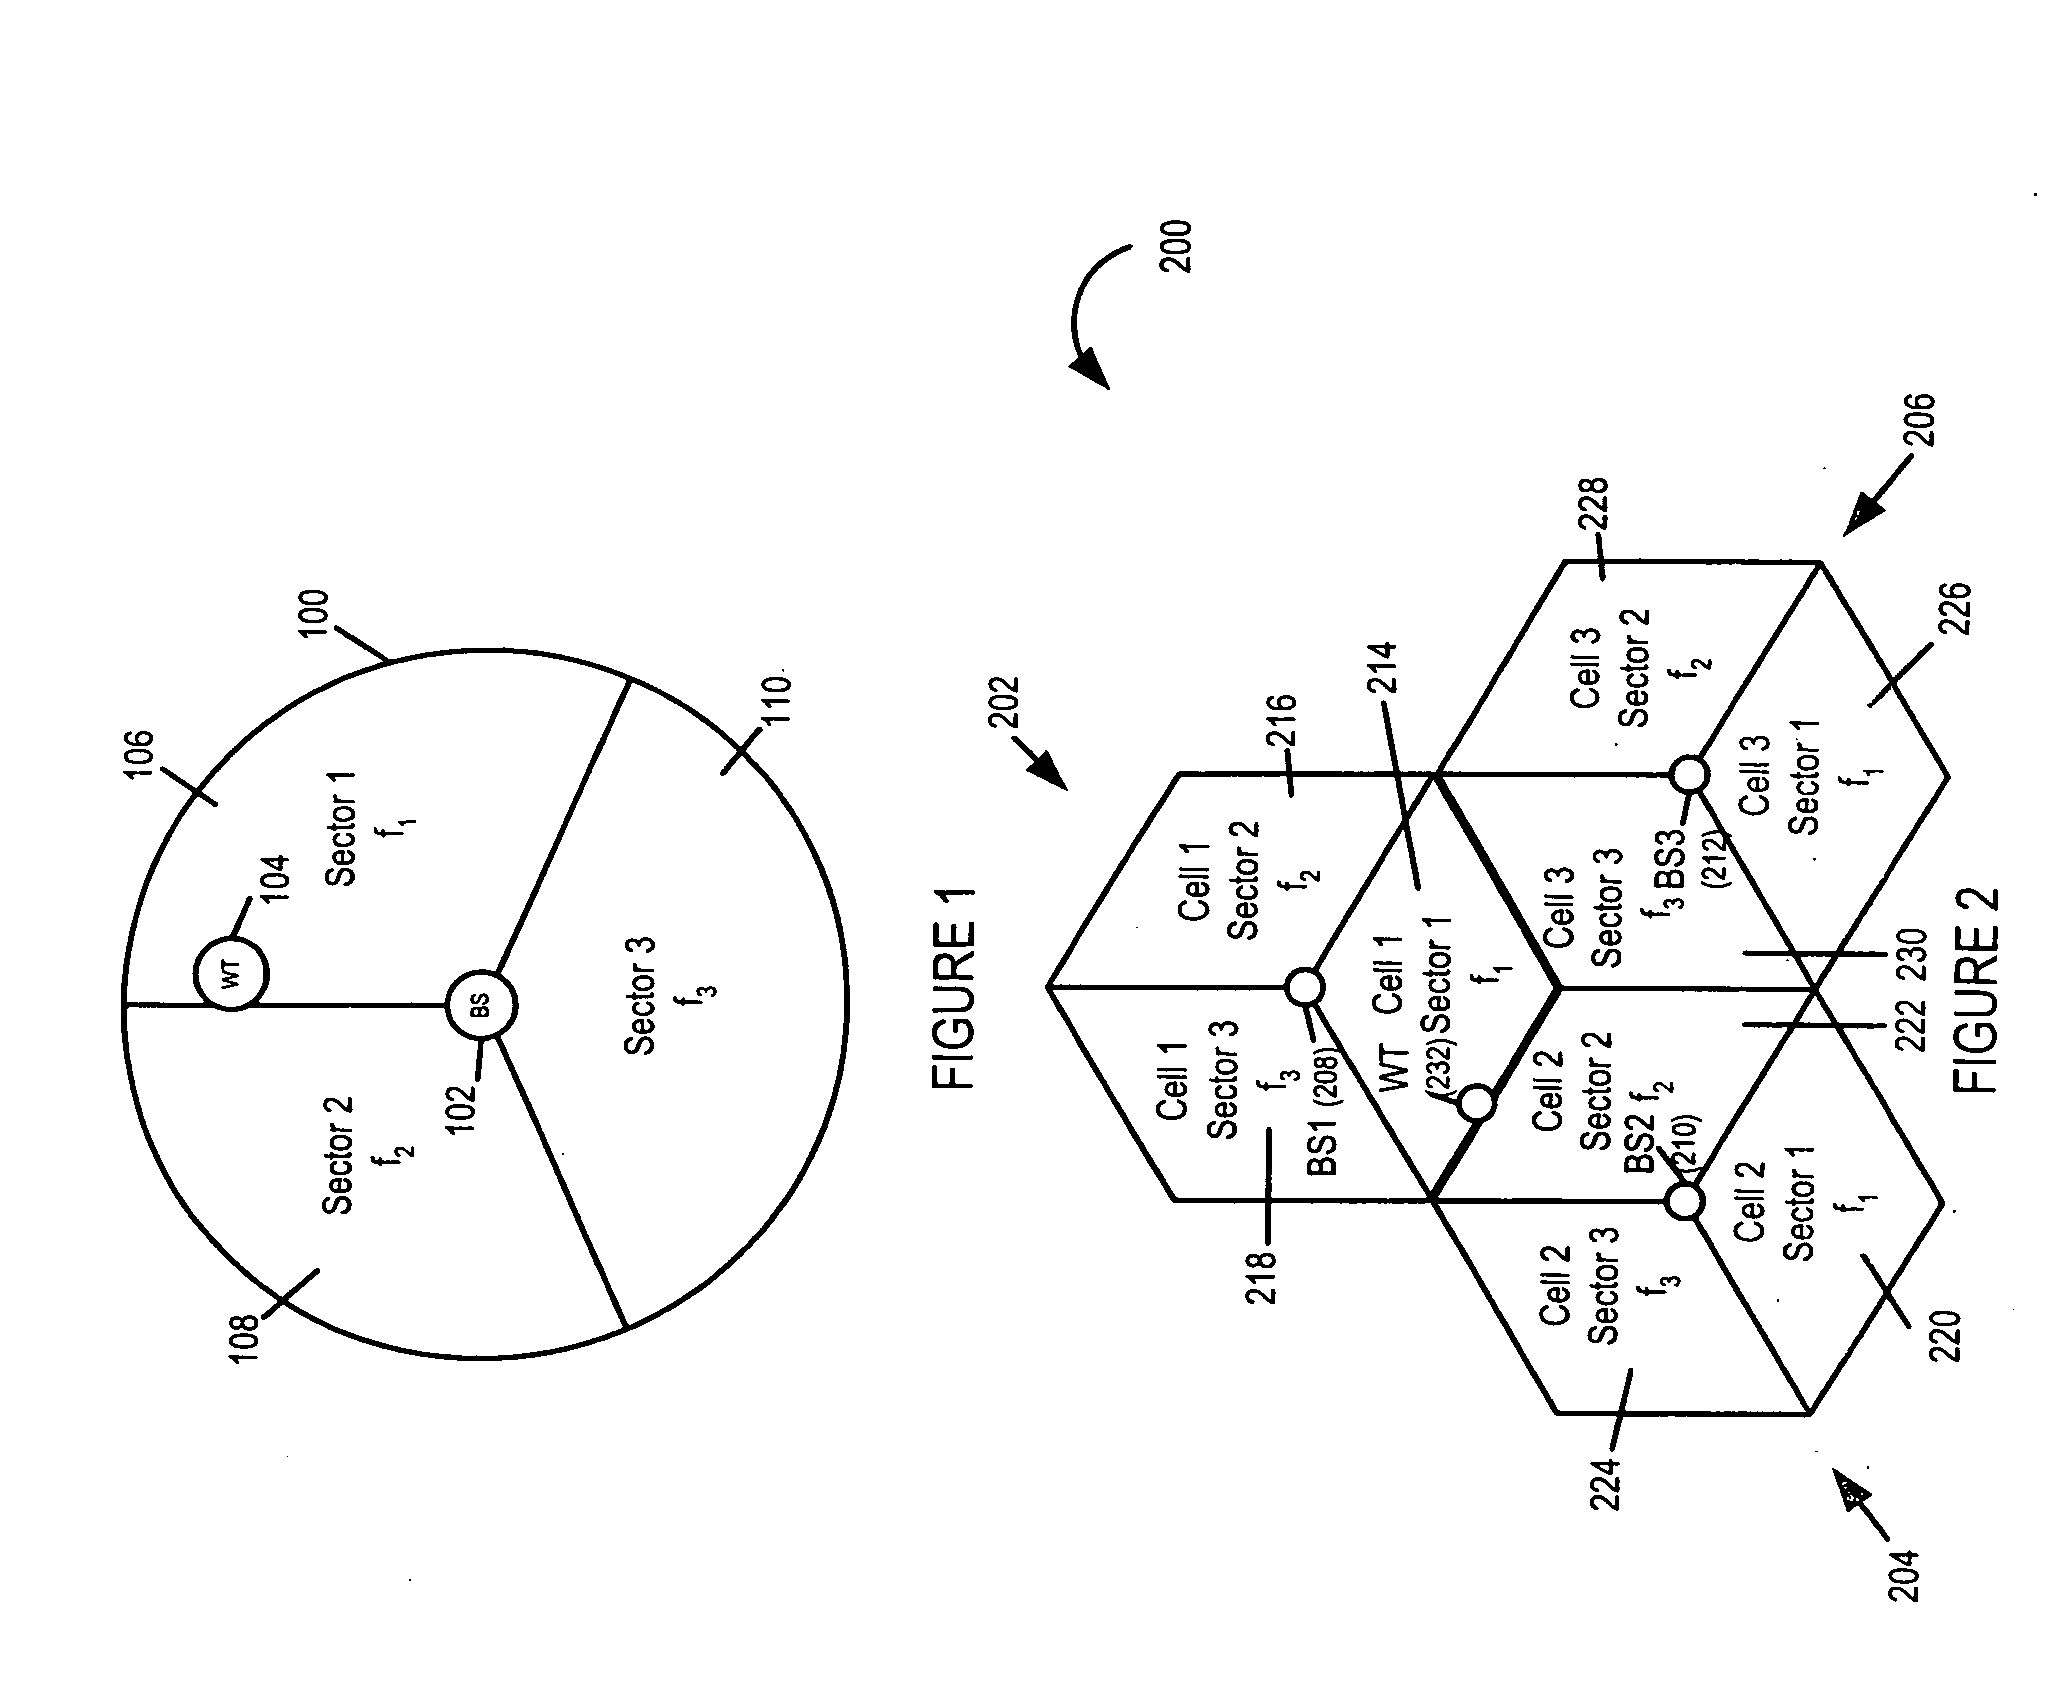 Methods and apparatus of improving inter-sector and/or inter-cell handoffs in a multi-carrier wireless communications system